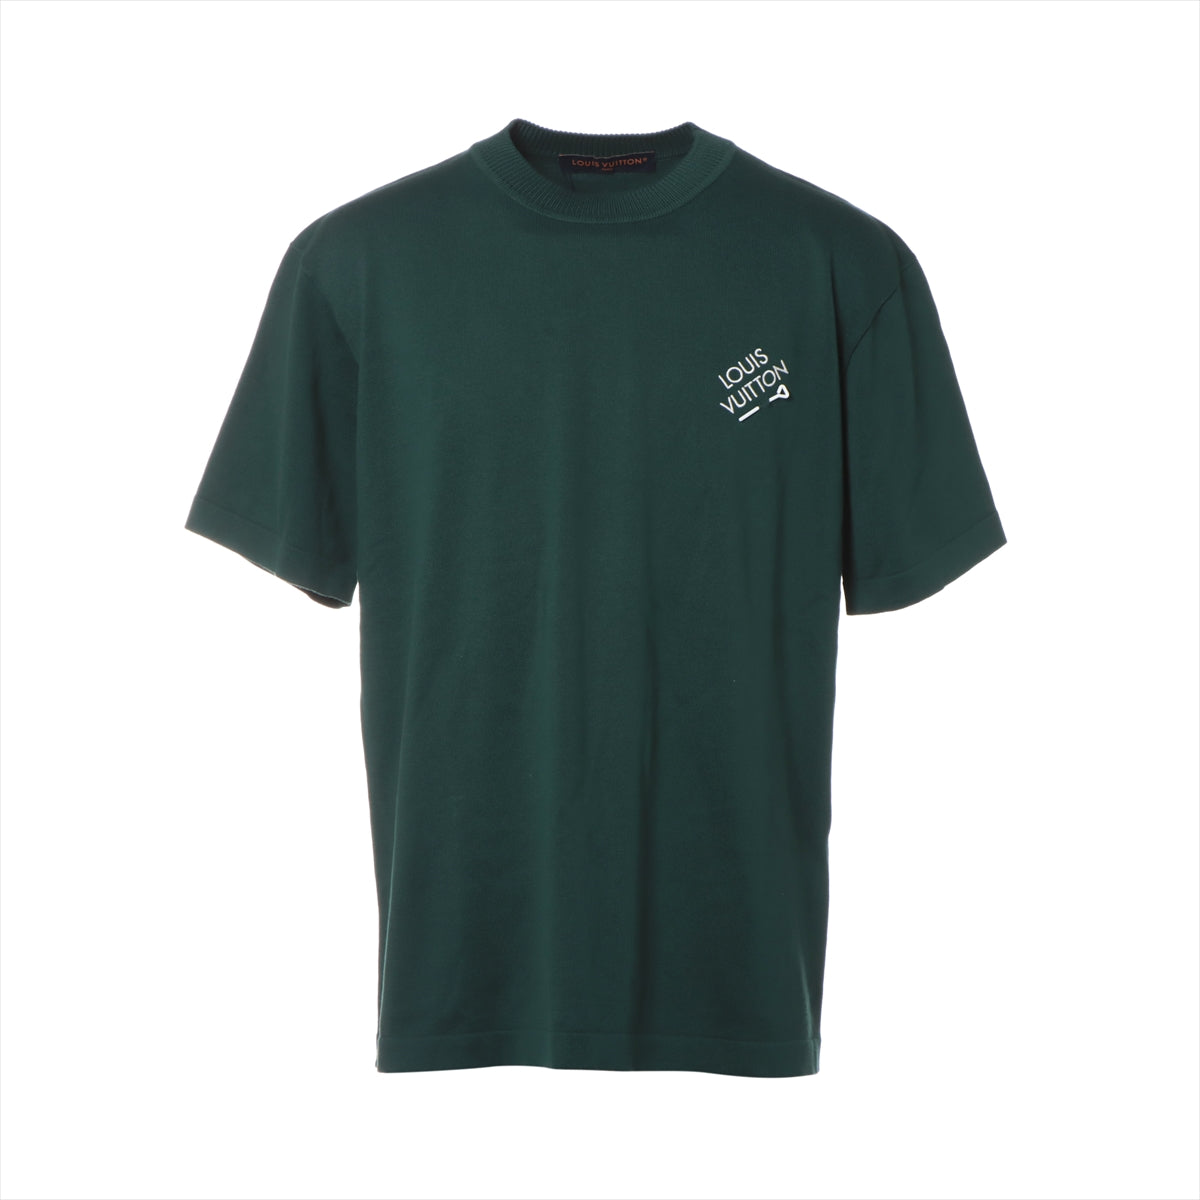 Louis Vuitton 23SS Cotton T-shirt L Men's Green  RM231MQ Logo embroidery with tag knit material